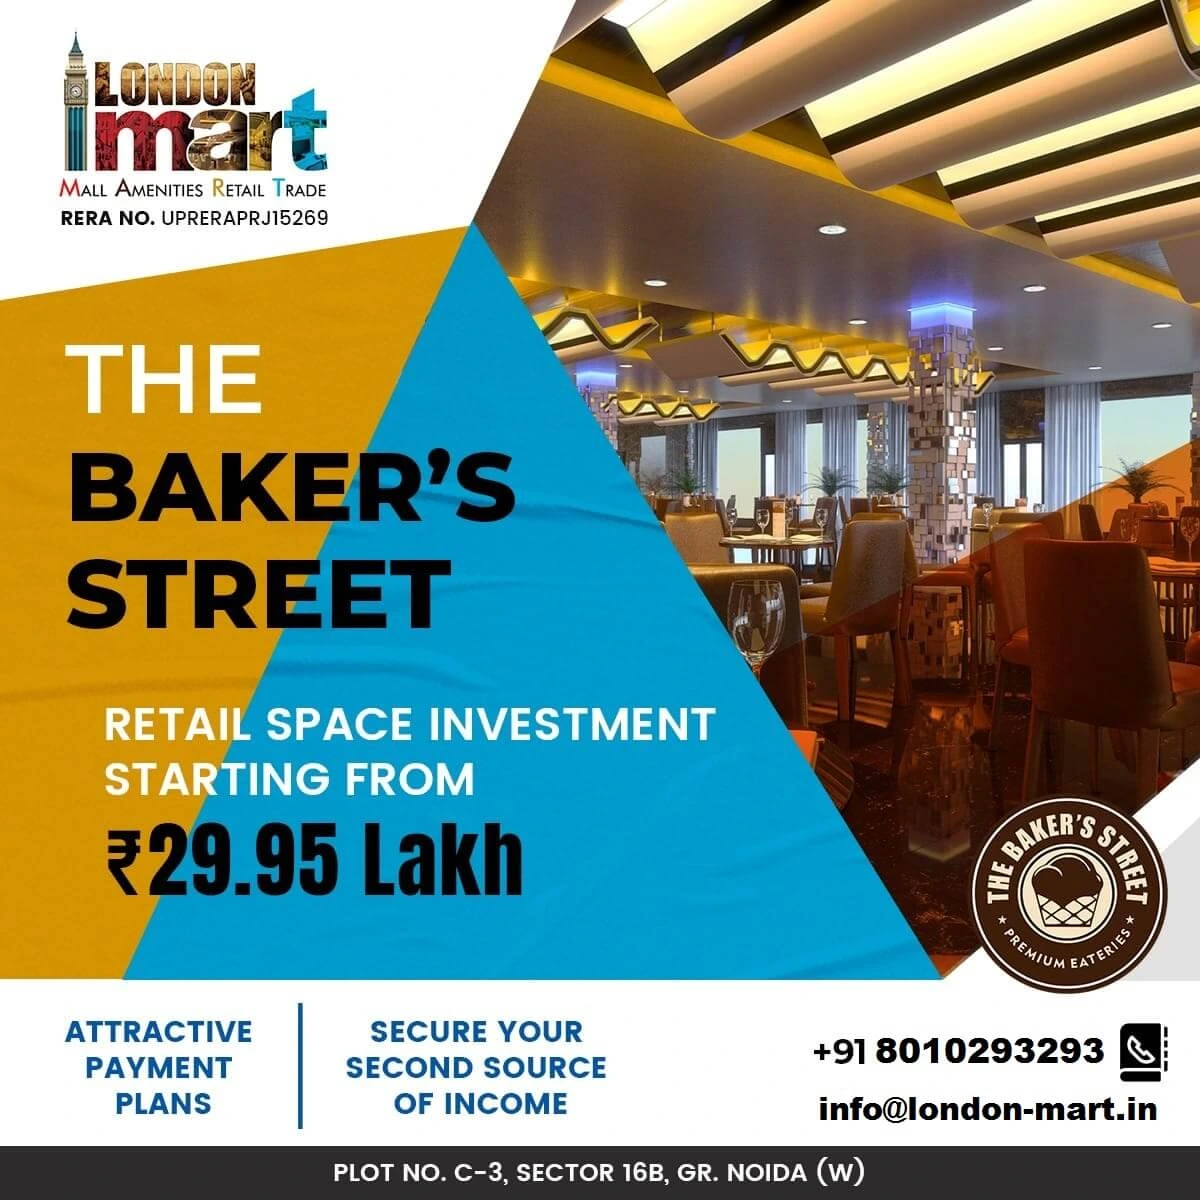 London Mart Bakers Street Commercial Mall